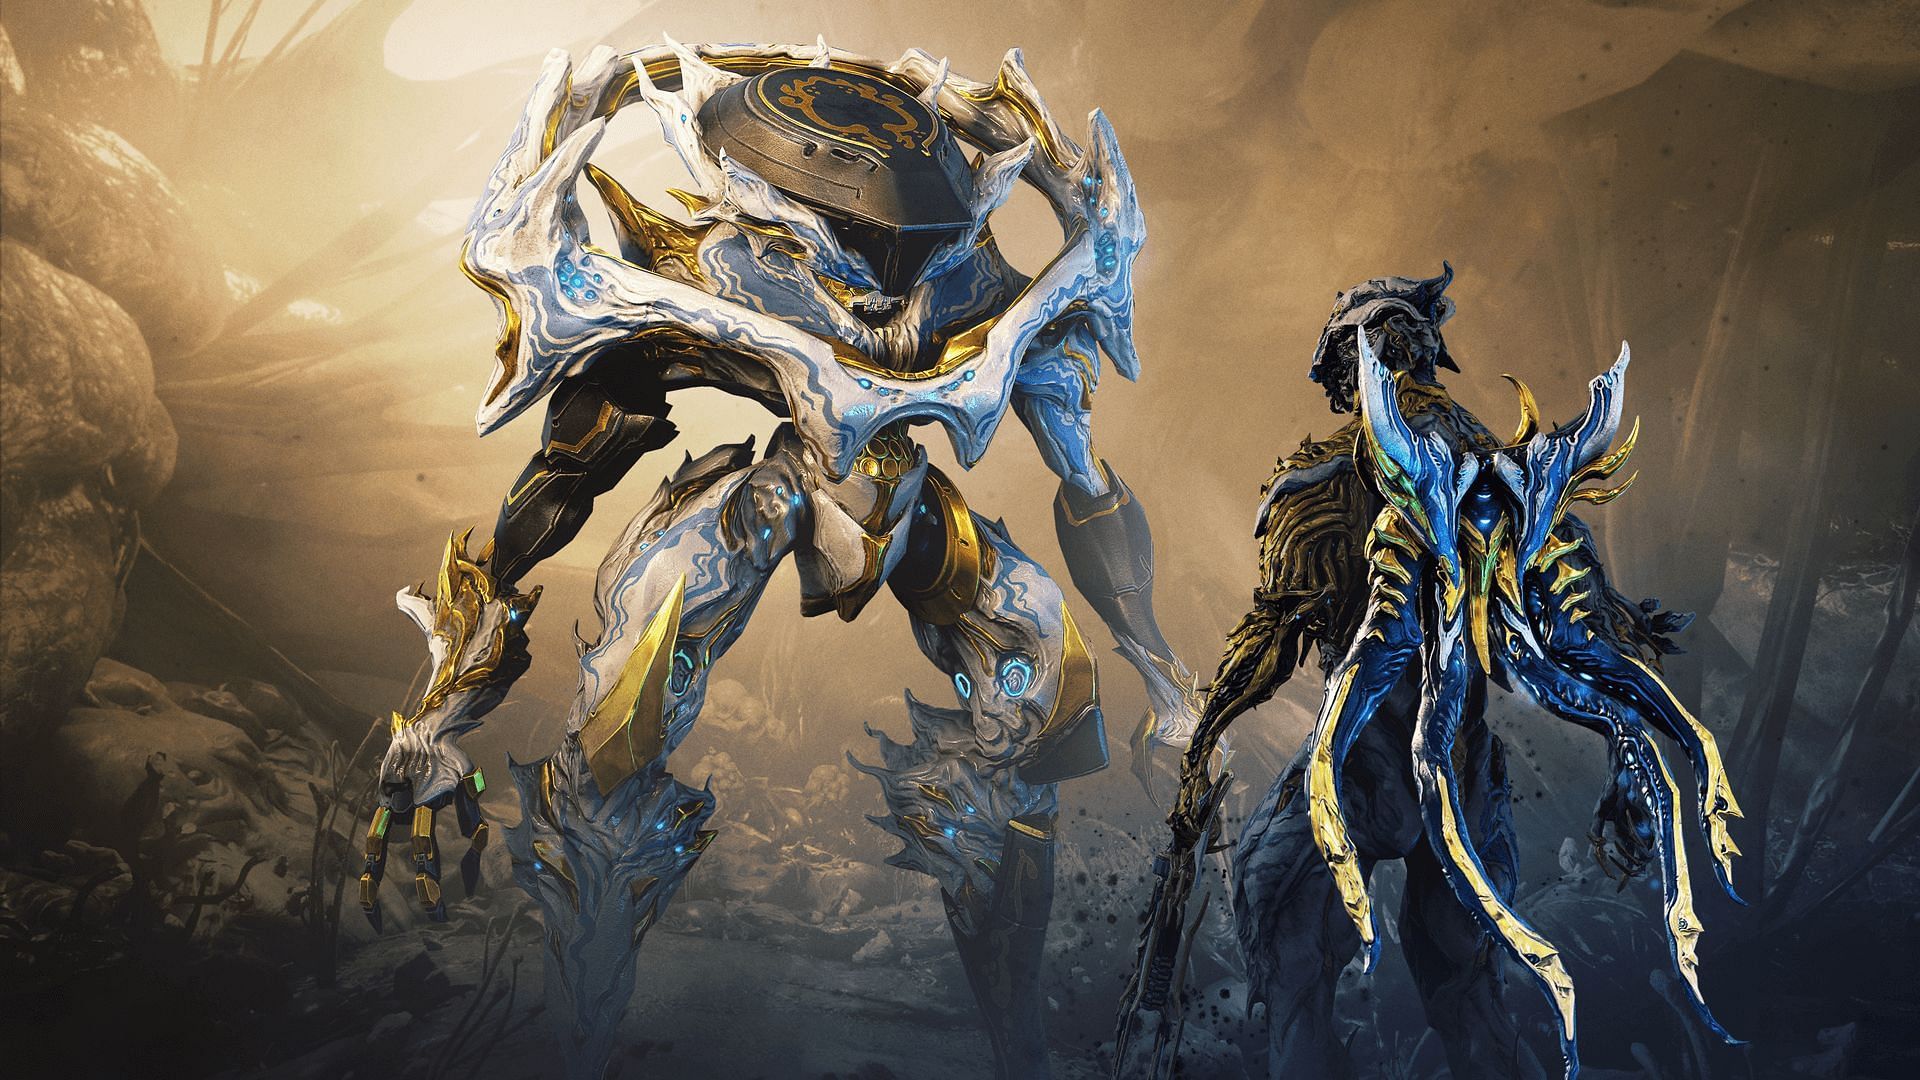 Necramechs are time-consuming to farm in Warframe (image via Digital Extremes)